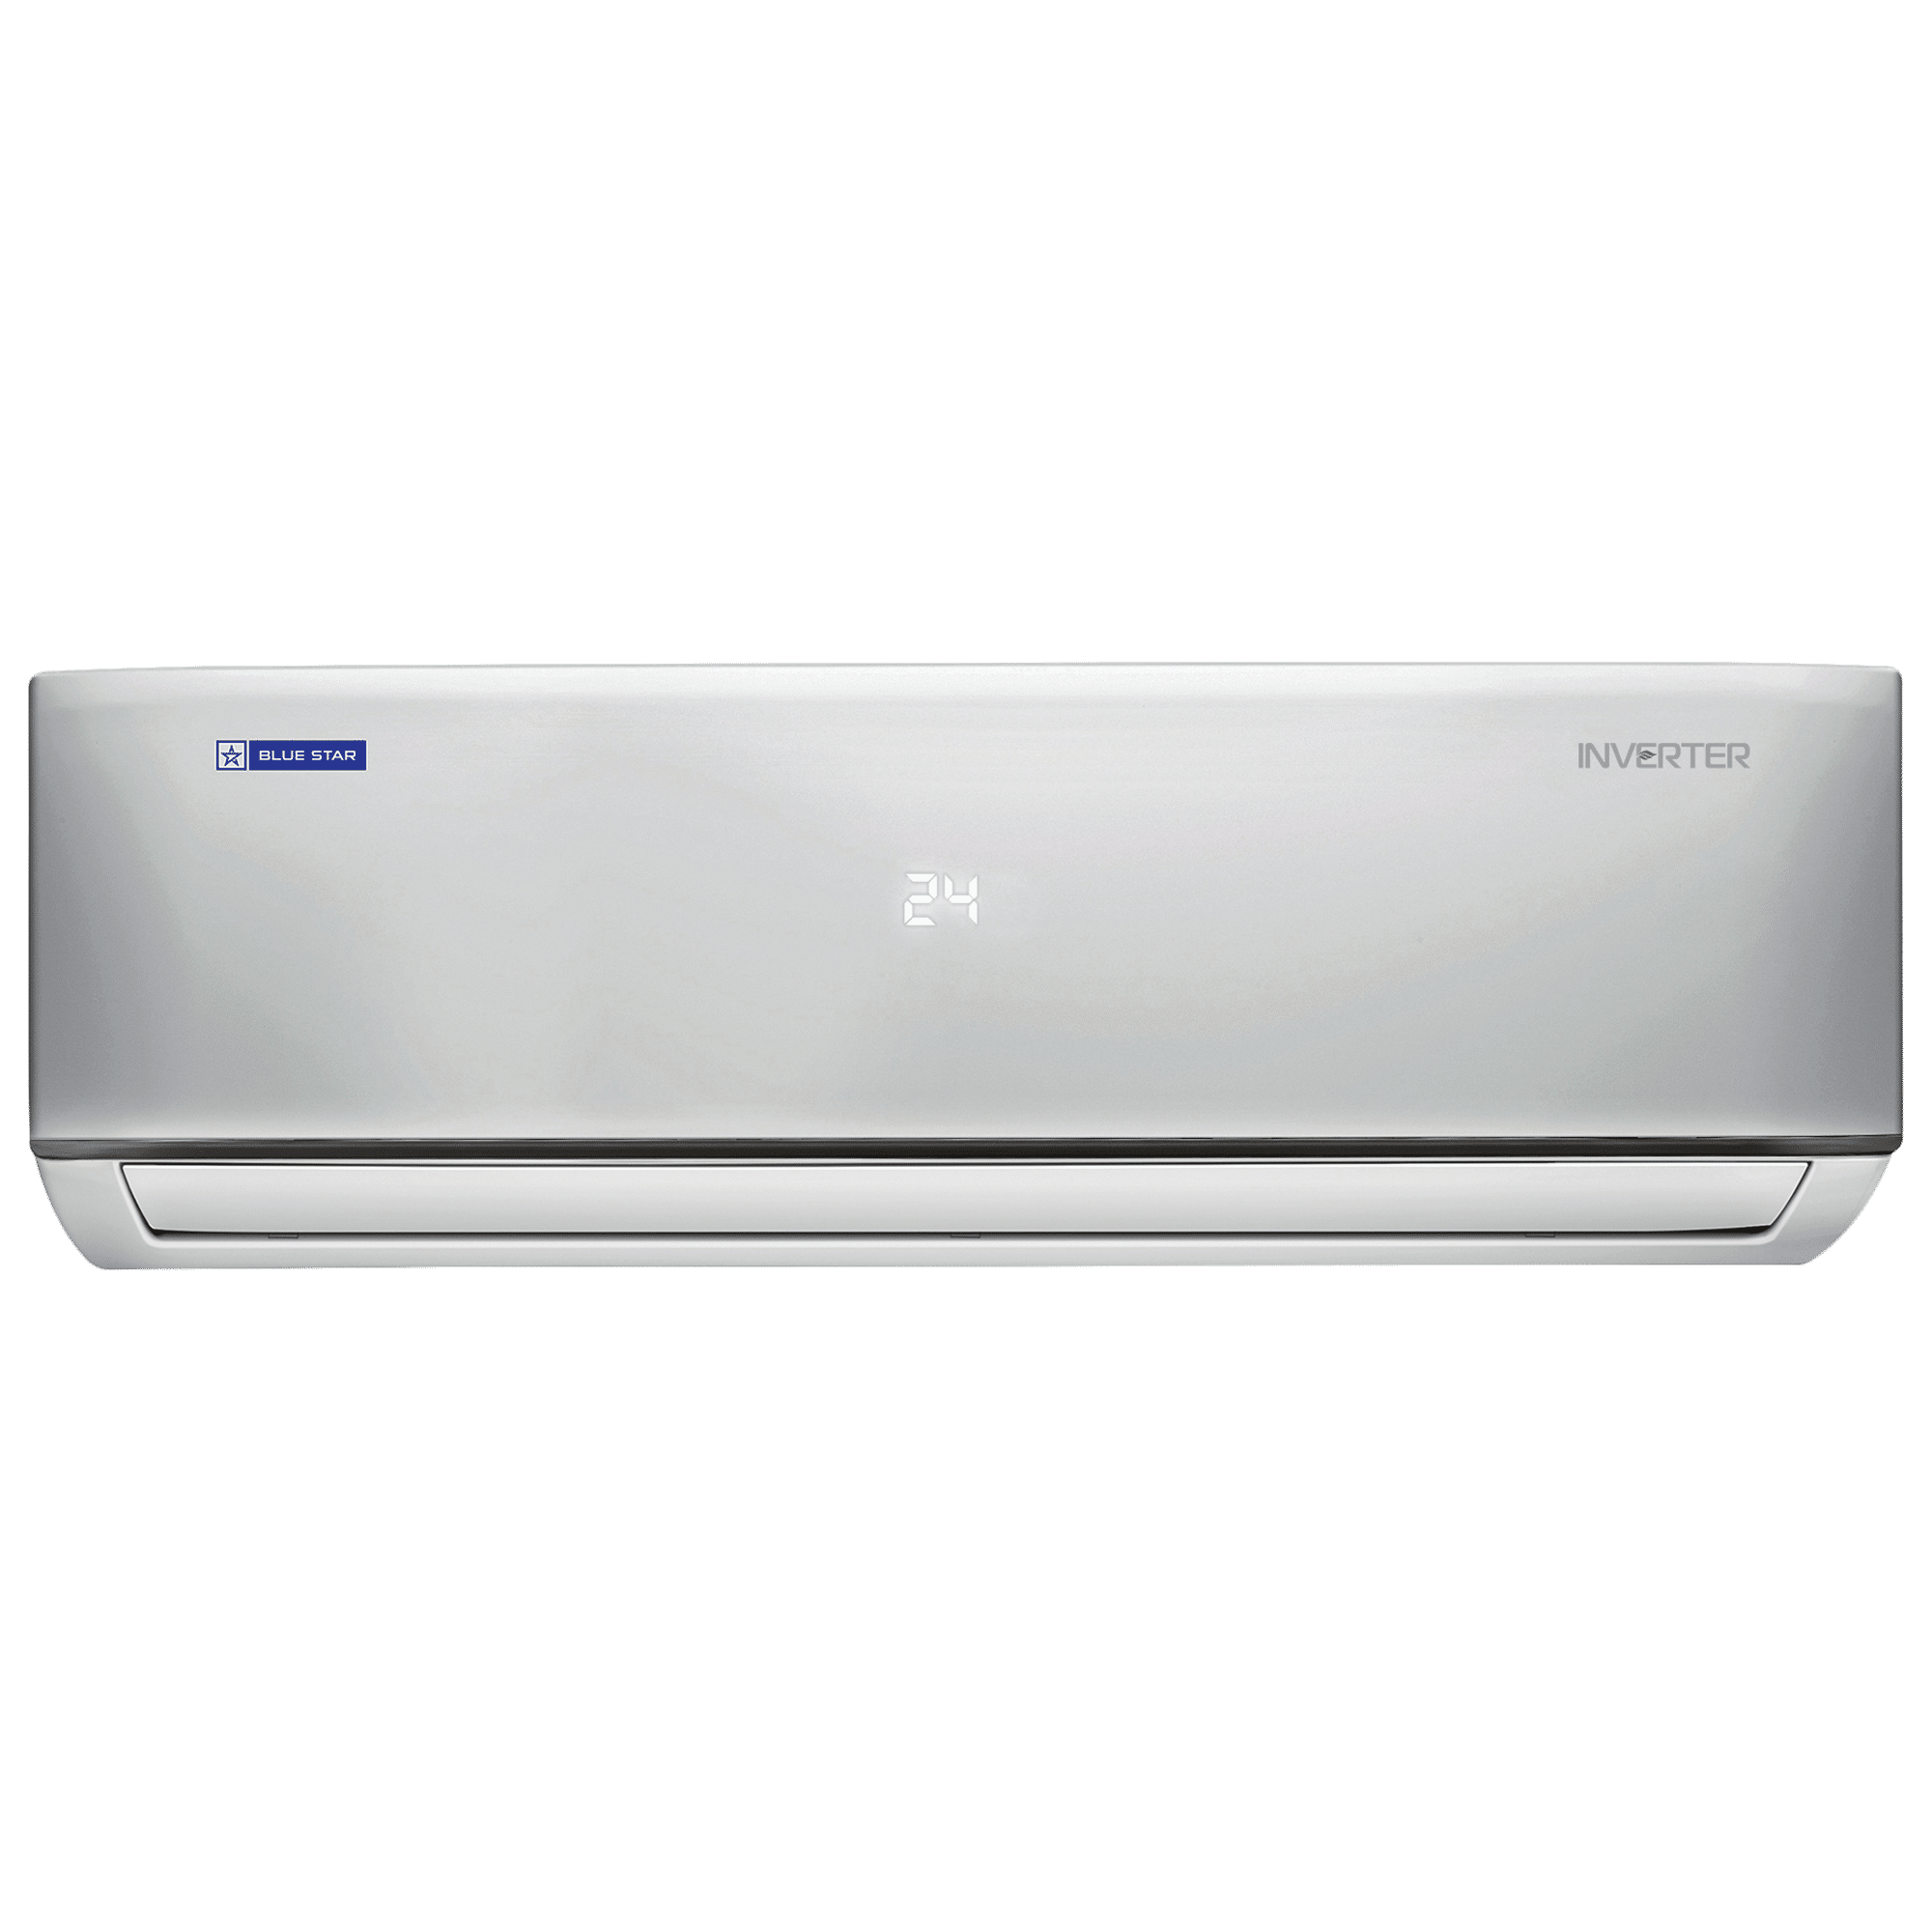 Buy Blue Star 5 in 1 Convertible 1.5 Ton 3 Star Hot & Cold Inverter Split AC with Active Carbon Filter (Copper Condenser, IA318DNUHC) Online - Croma